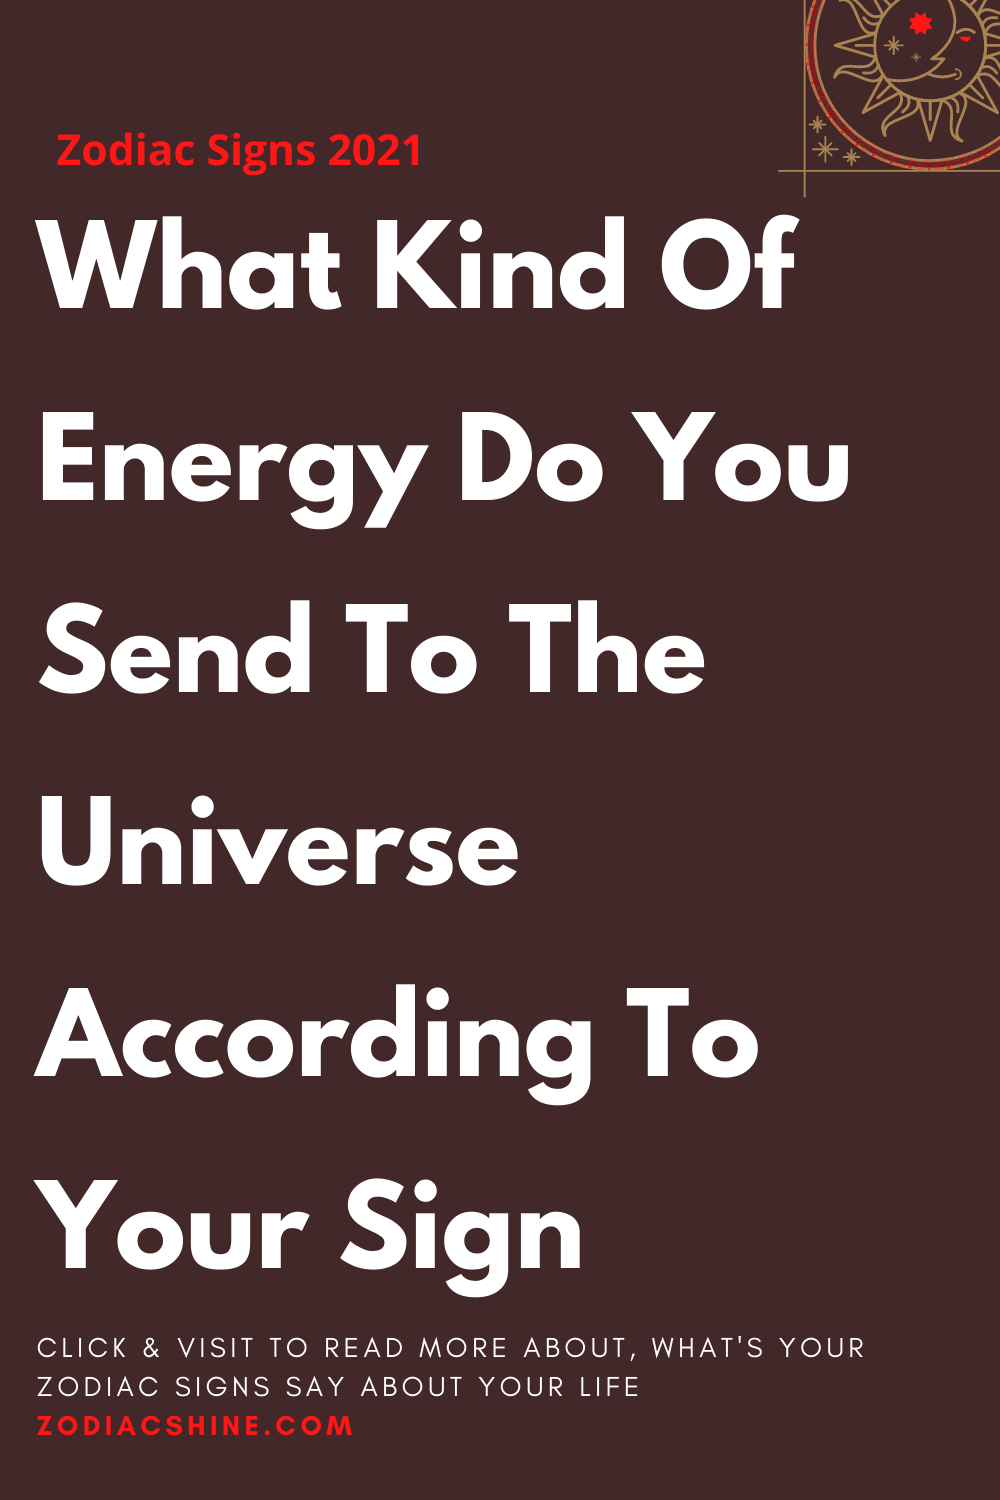 What Kind Of Energy Do You Send To The Universe According To Your Sign